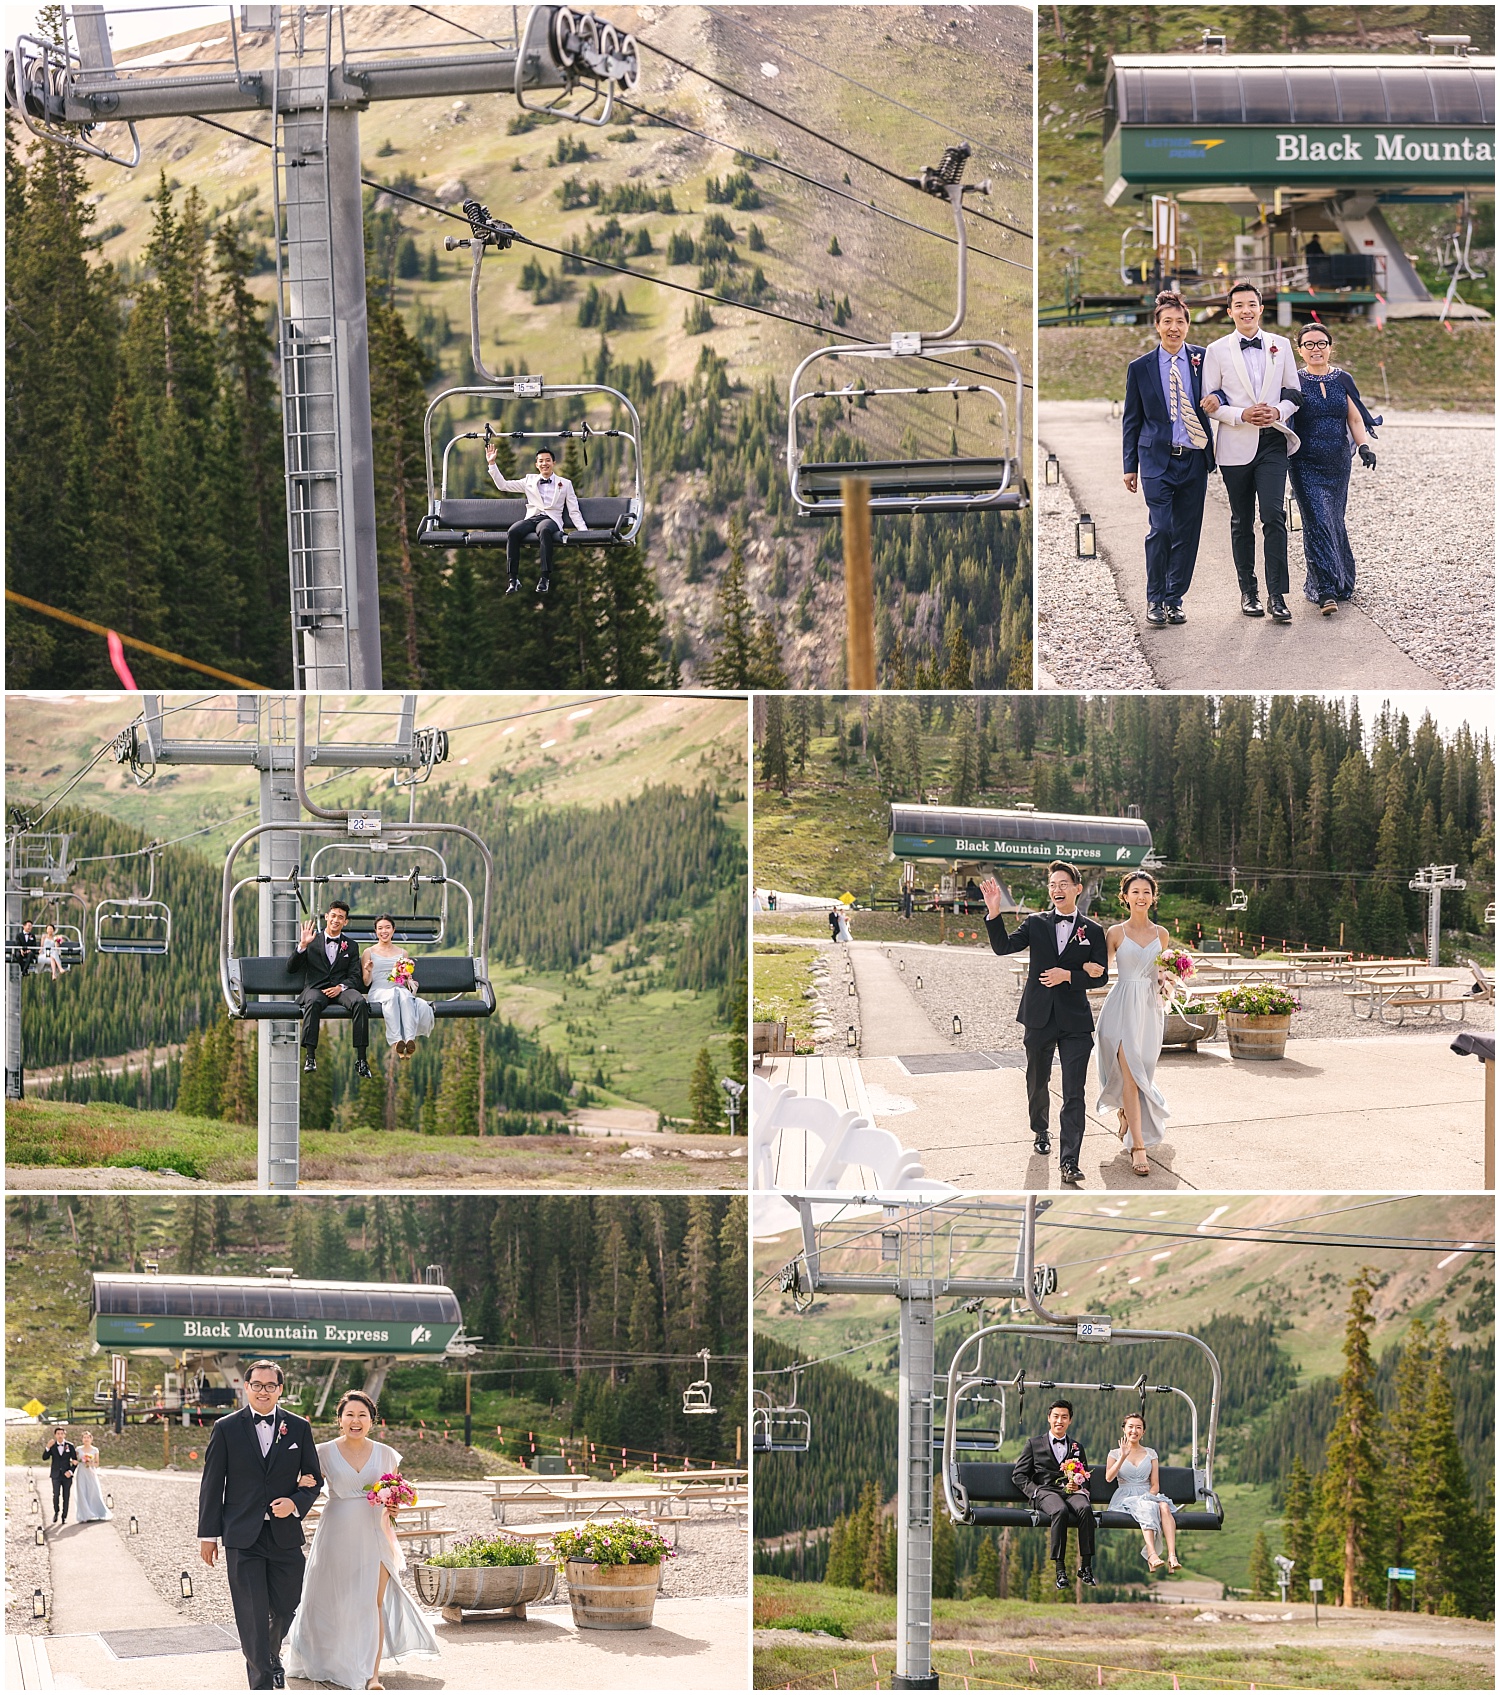 wedding party make entrance to Black Mountain Lodge wedding ceremony from ski lifts at Arapahoe Basin